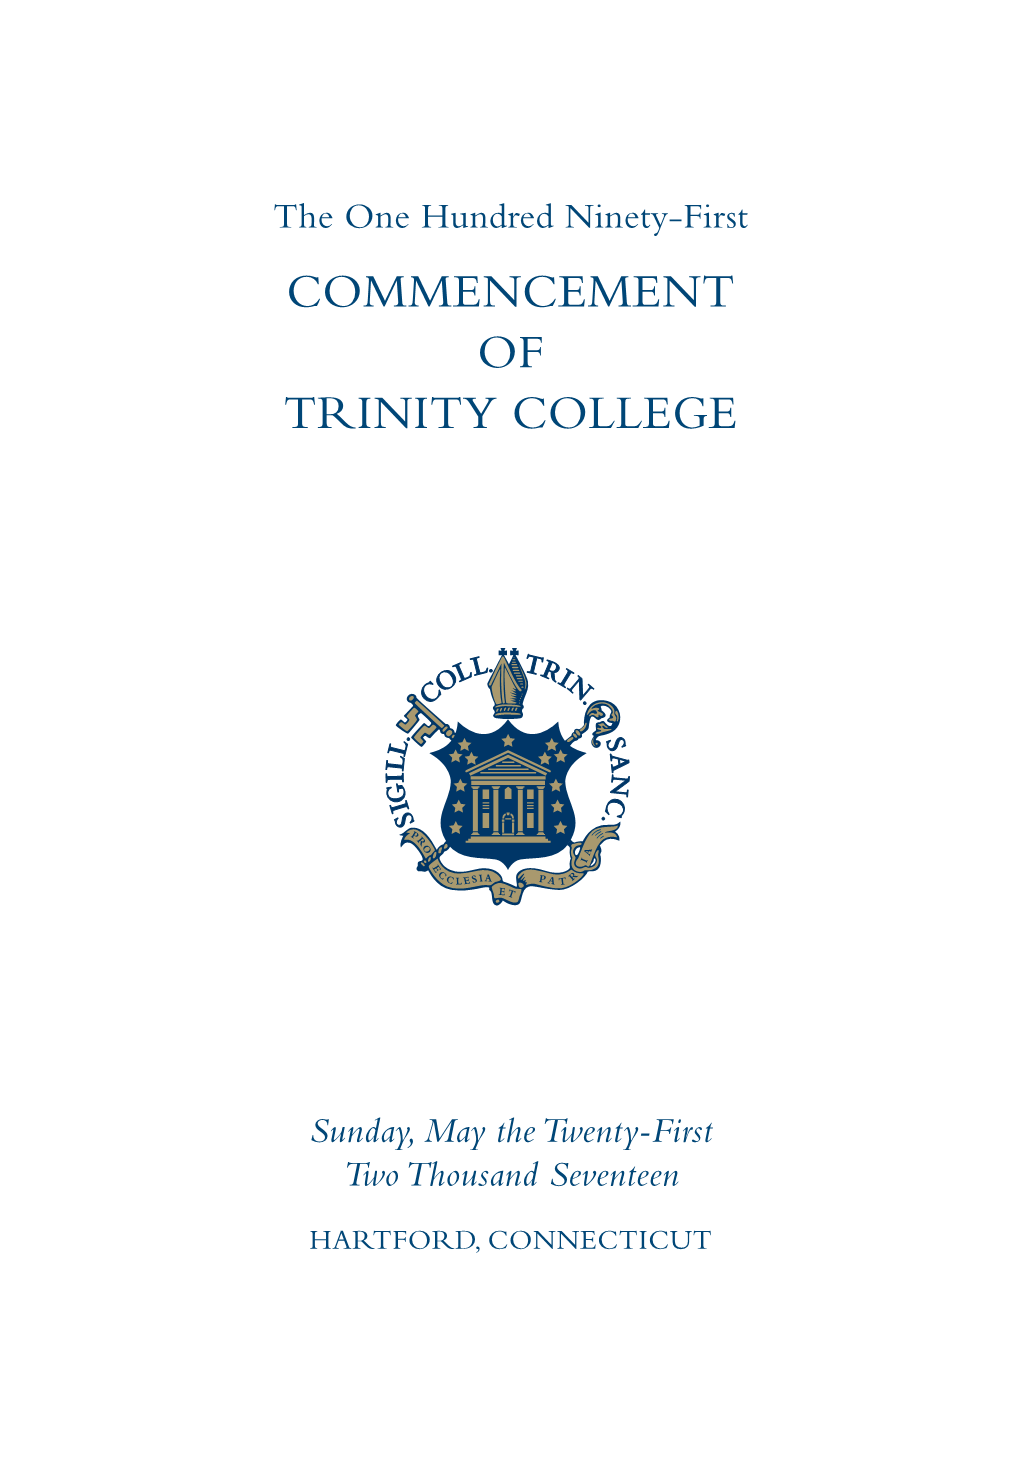 Commencement of Trinity College